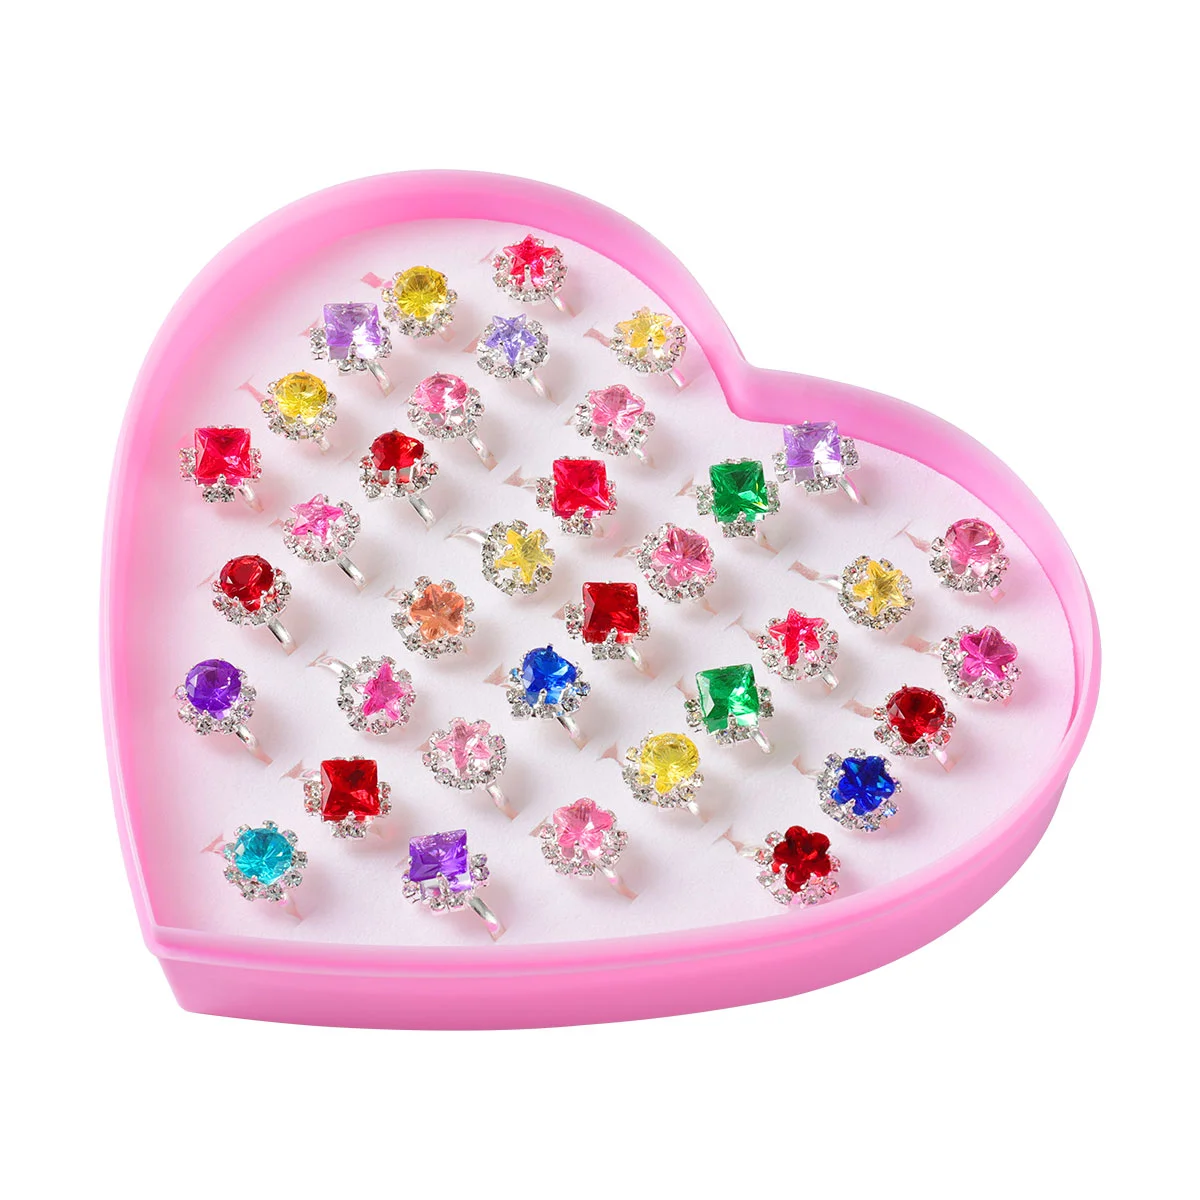 

Kids Adjustable Rings in Box Pretend Jewelry Rings Set Jewelry Dress Play Toys for Little Girl, 36pcs Makeup ñiñas